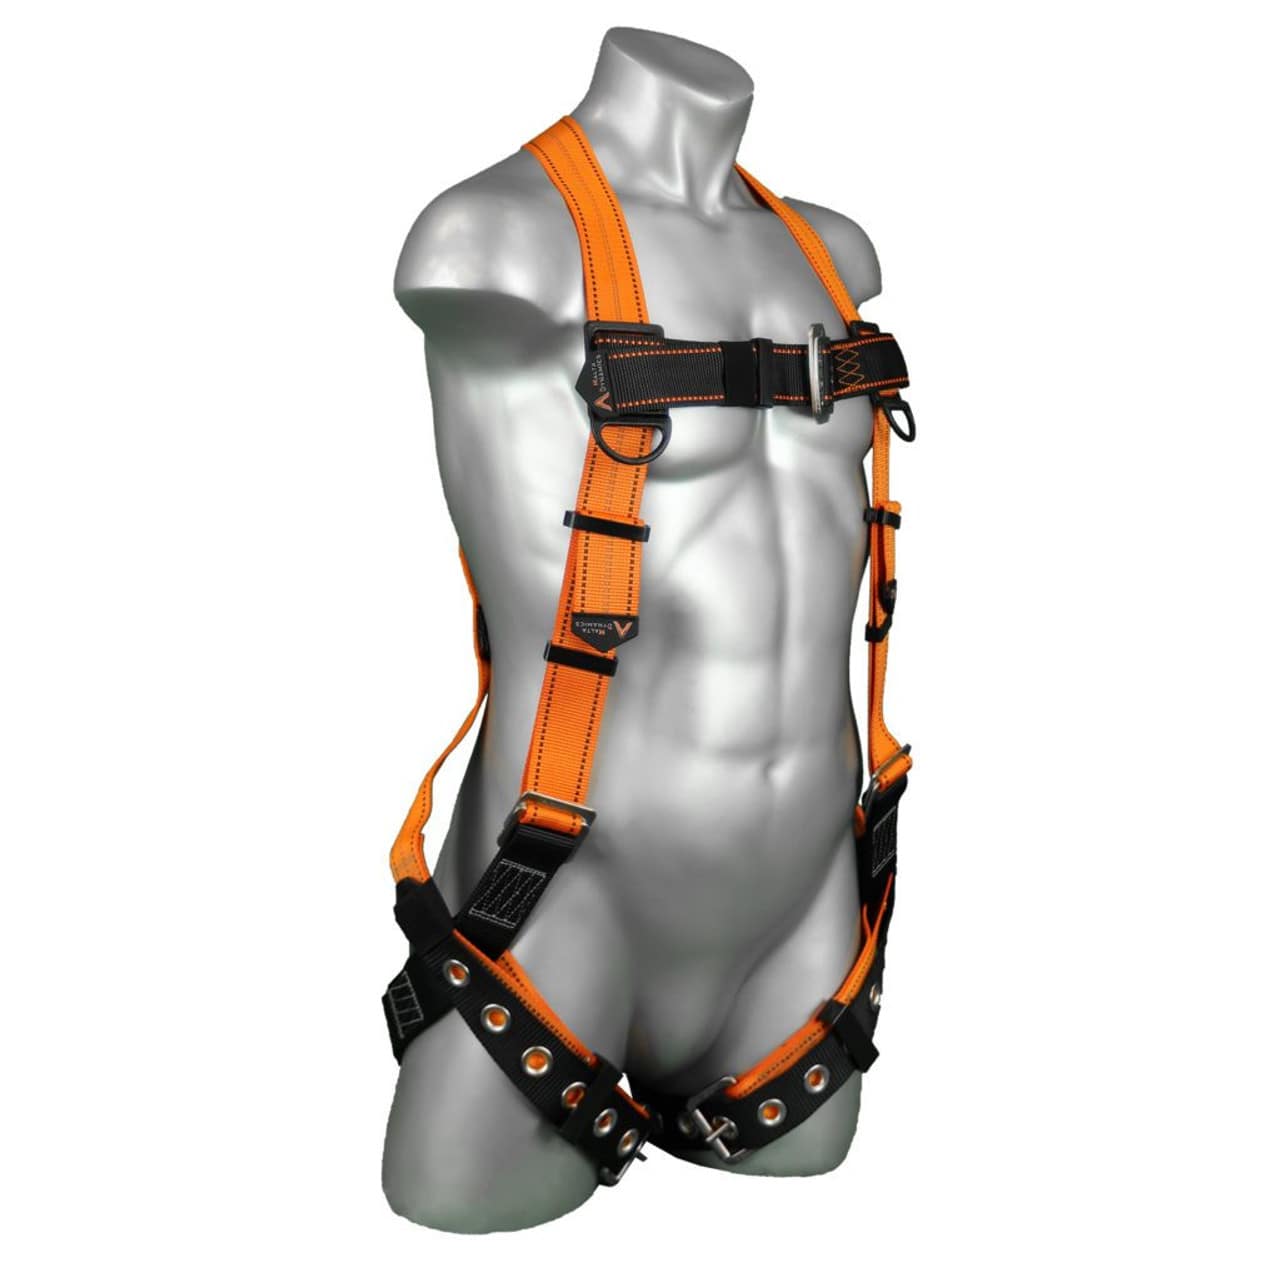 Malta Dynamics Warthog B2002 harness with tongue and buckle leg straps.